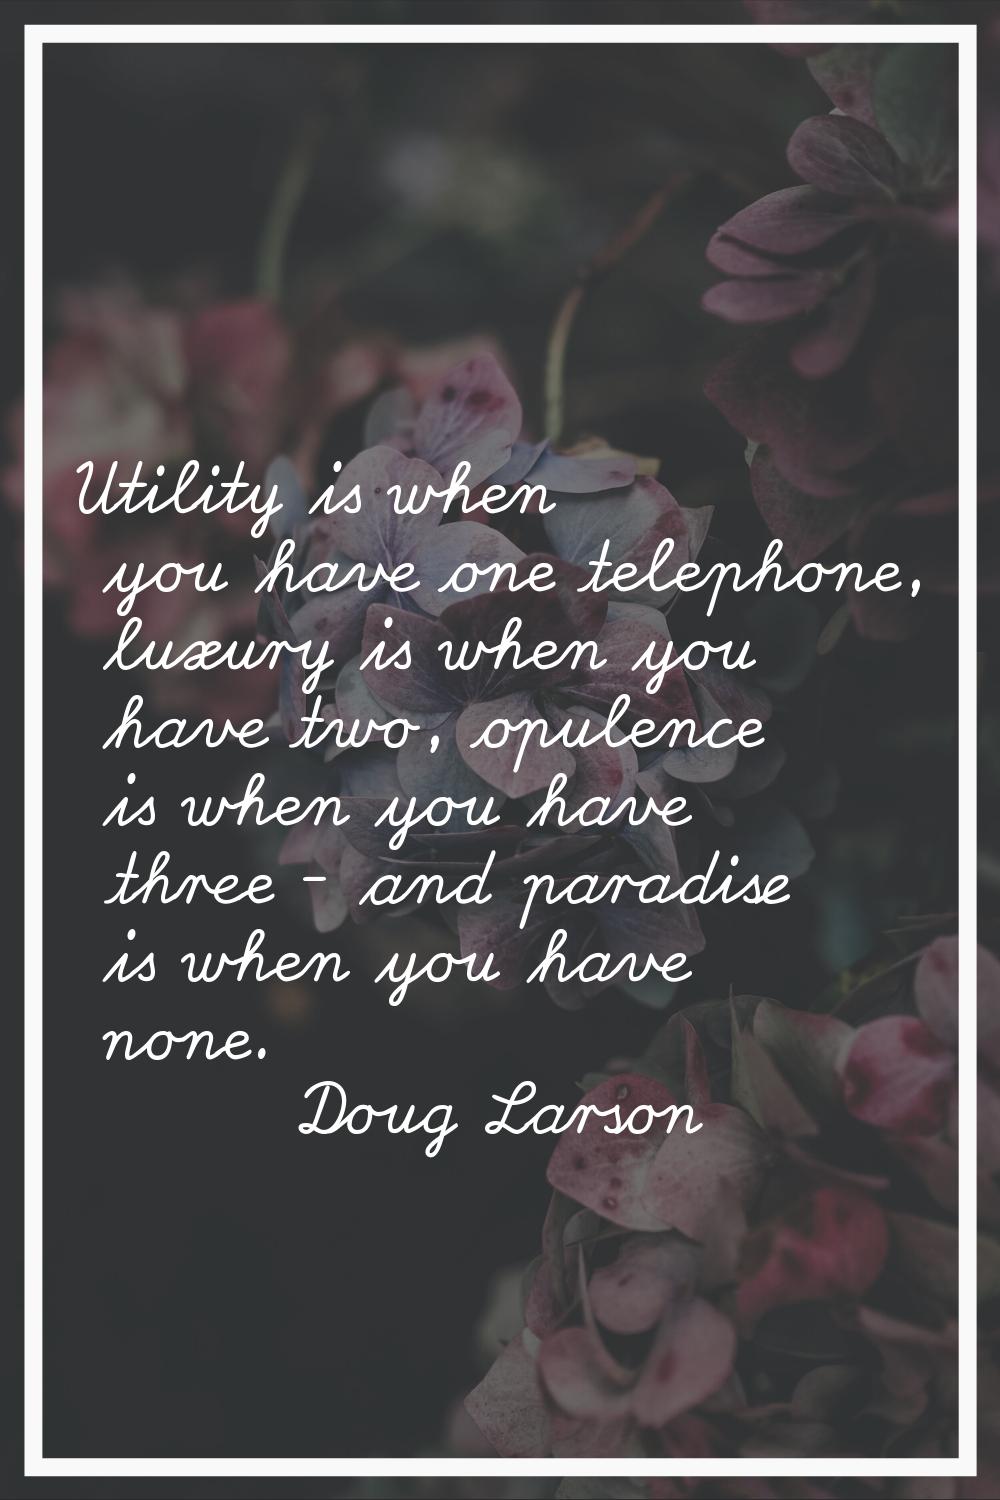 Utility is when you have one telephone, luxury is when you have two, opulence is when you have thre